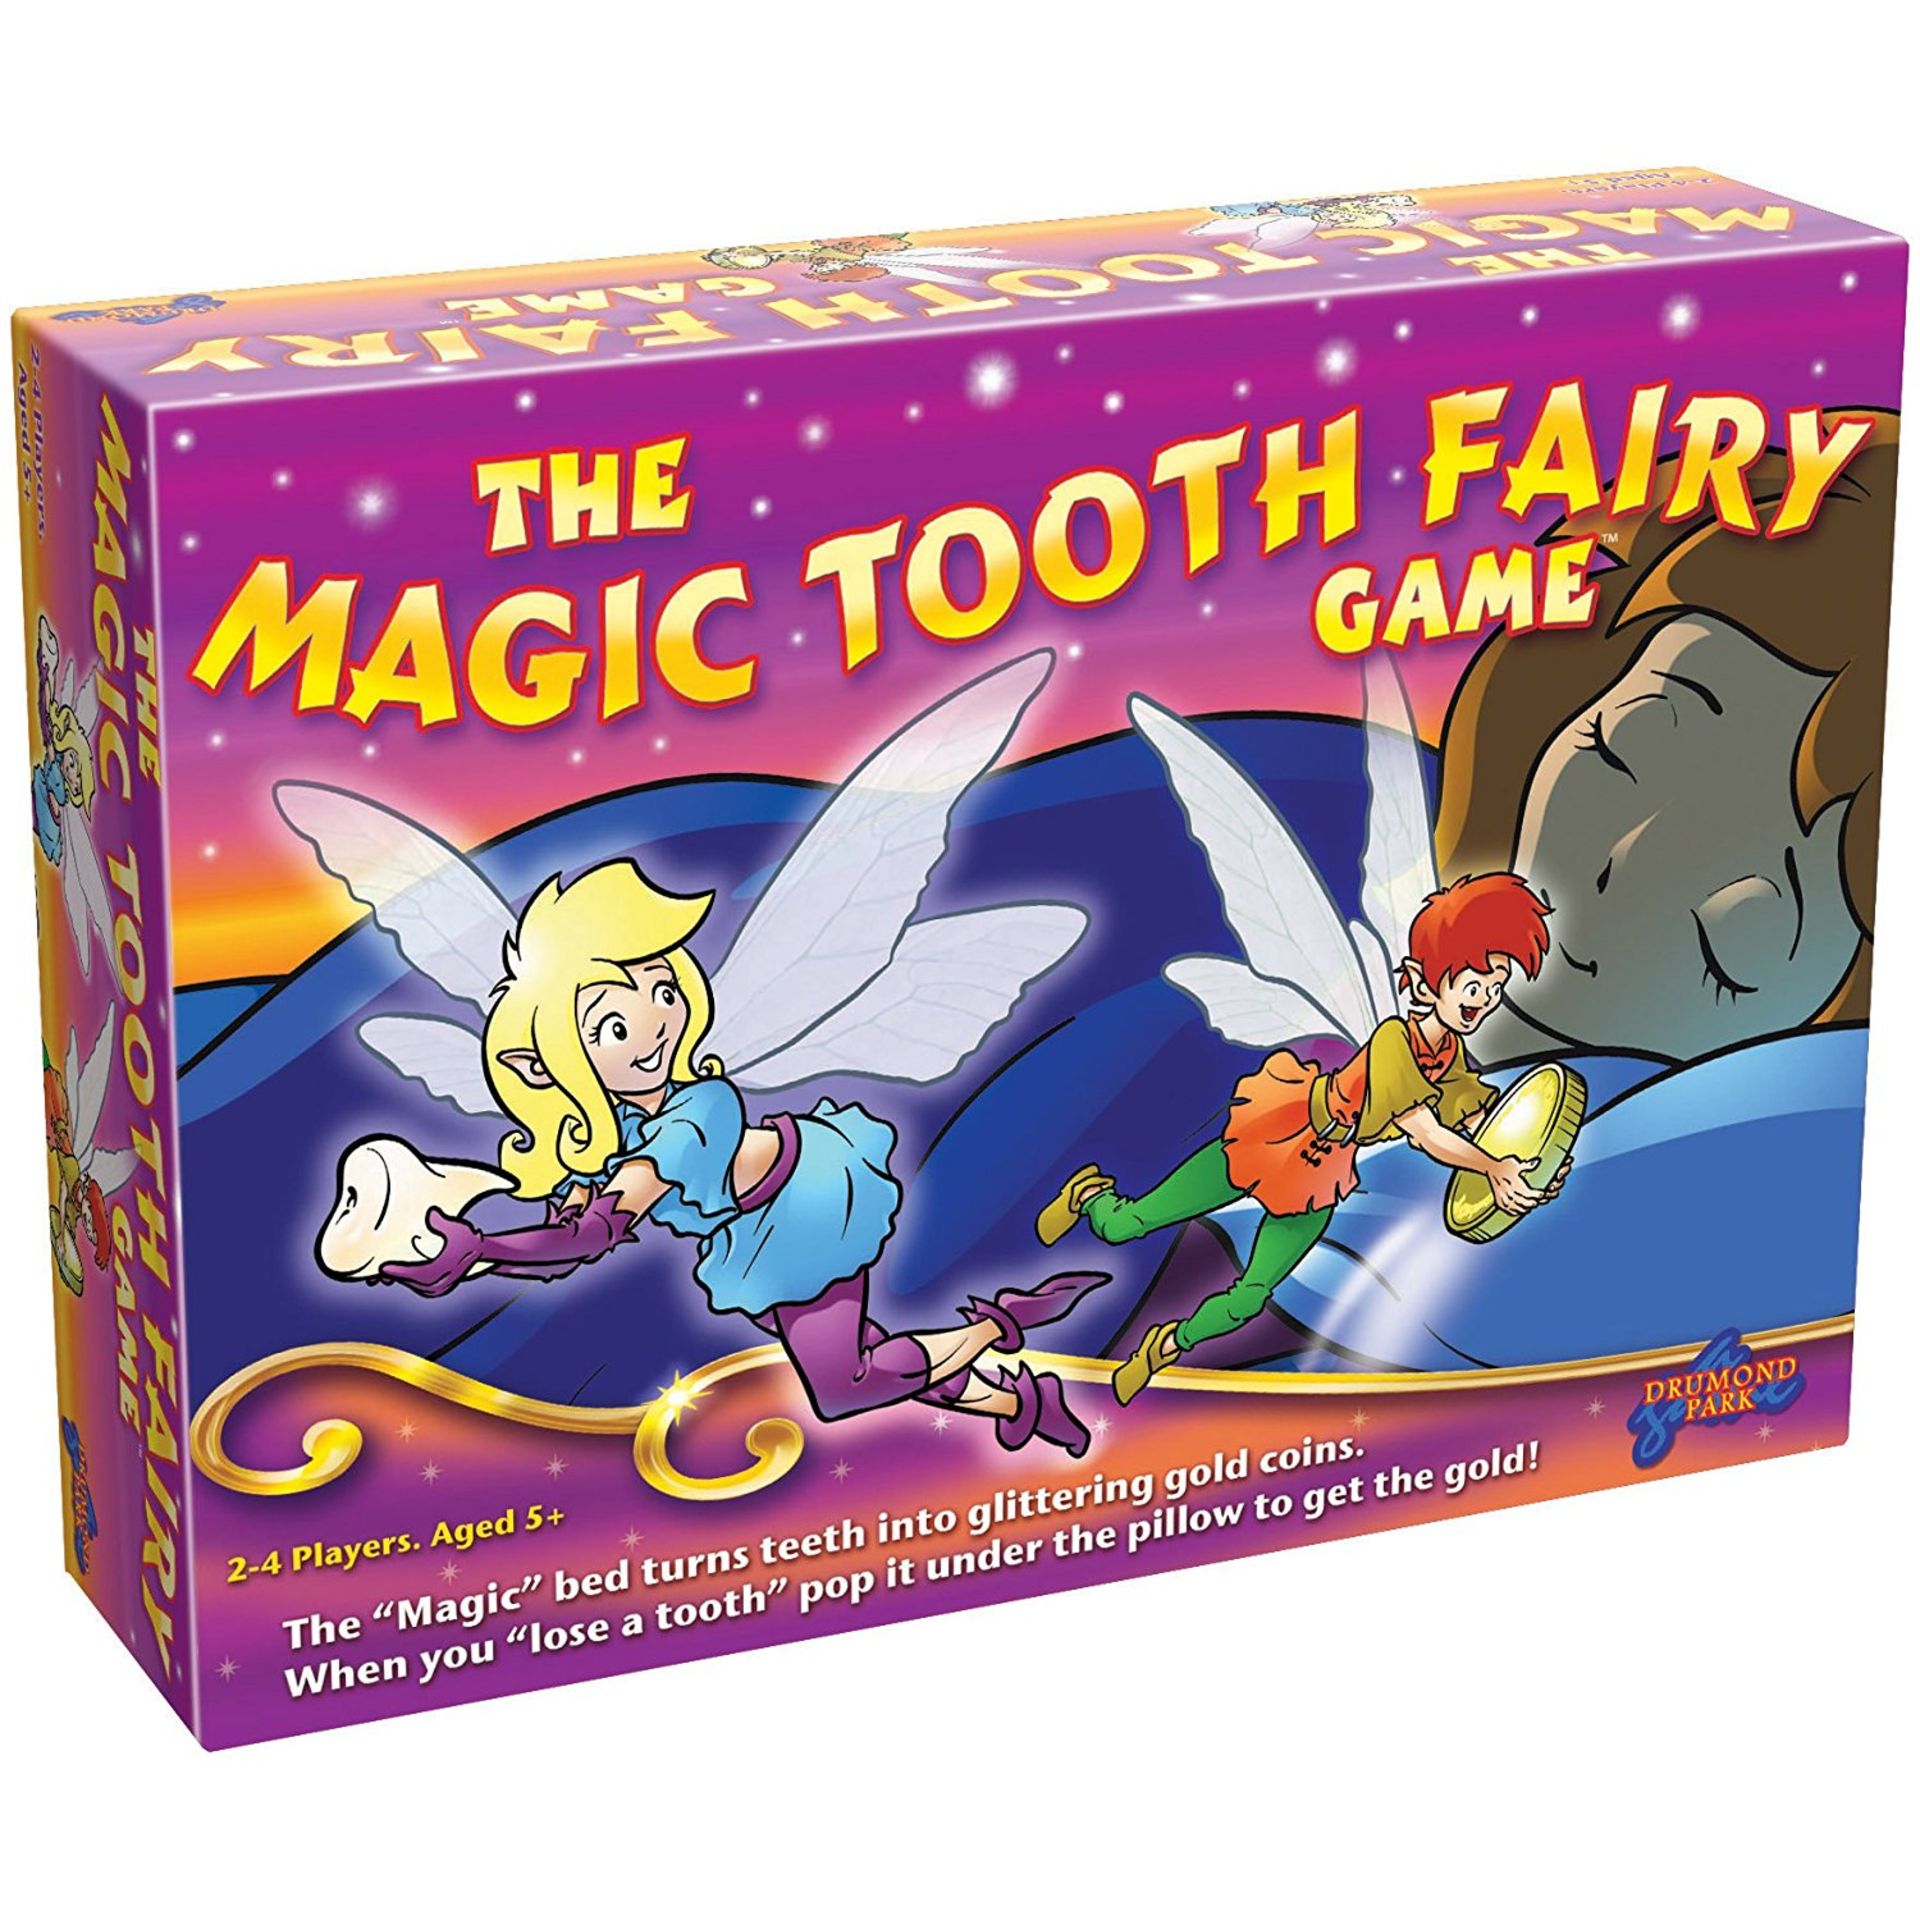 28 x Poppit: Pop 'N' Display Bakery- Poppit Clay Playset & 26 x The Magic Tooth Fairy Game RRP £1079 - Image 2 of 4